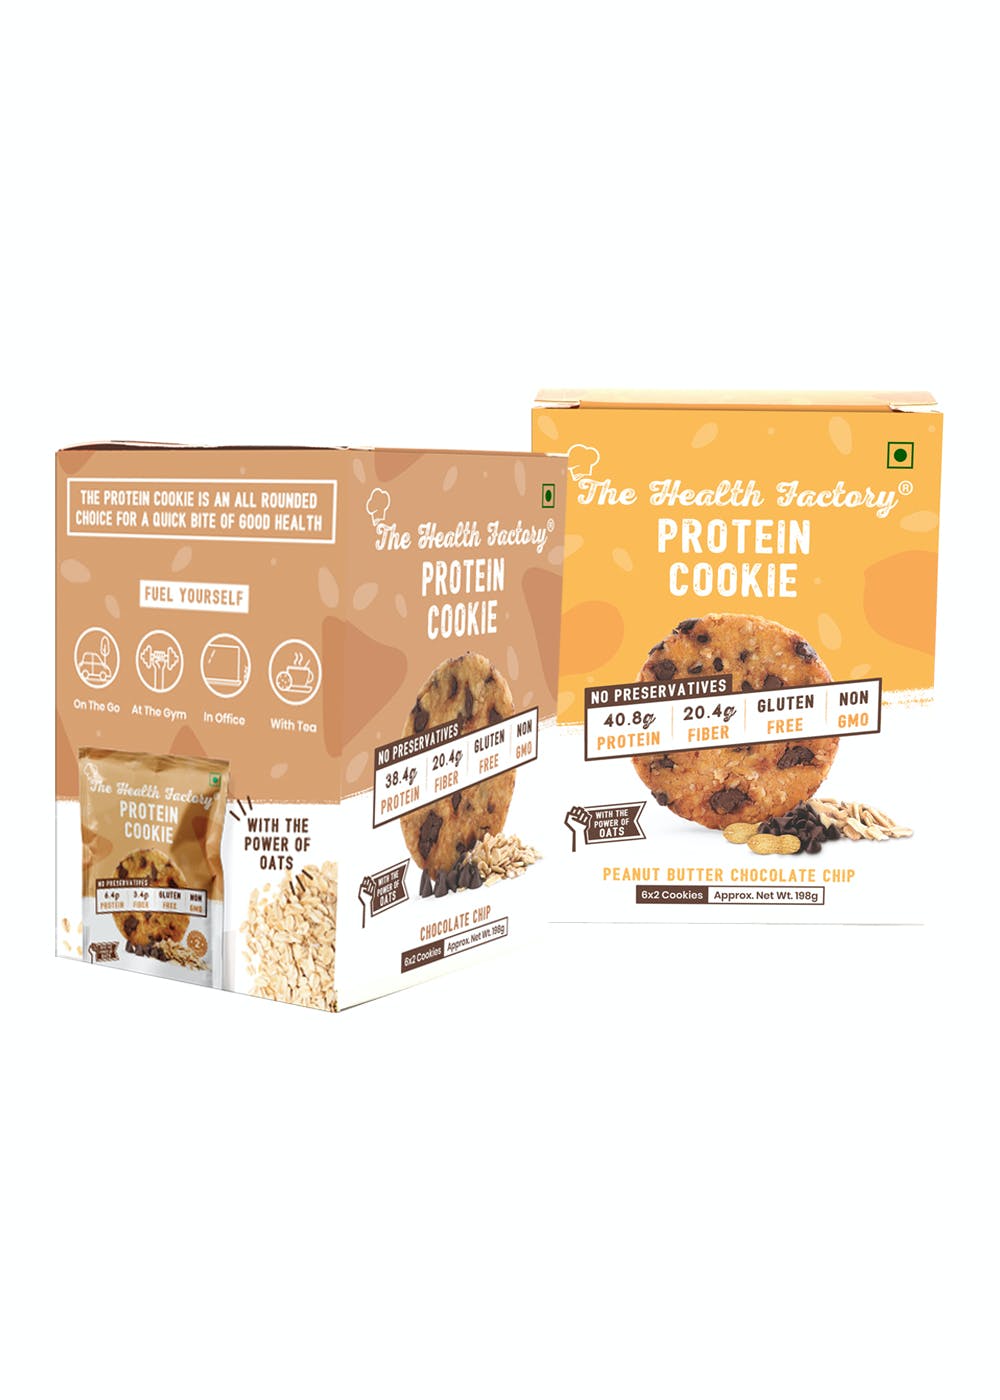 Chocolate Chip + Peanut Butter Chocolate Chip Protein Cookie - Set of 2 (198g Each)